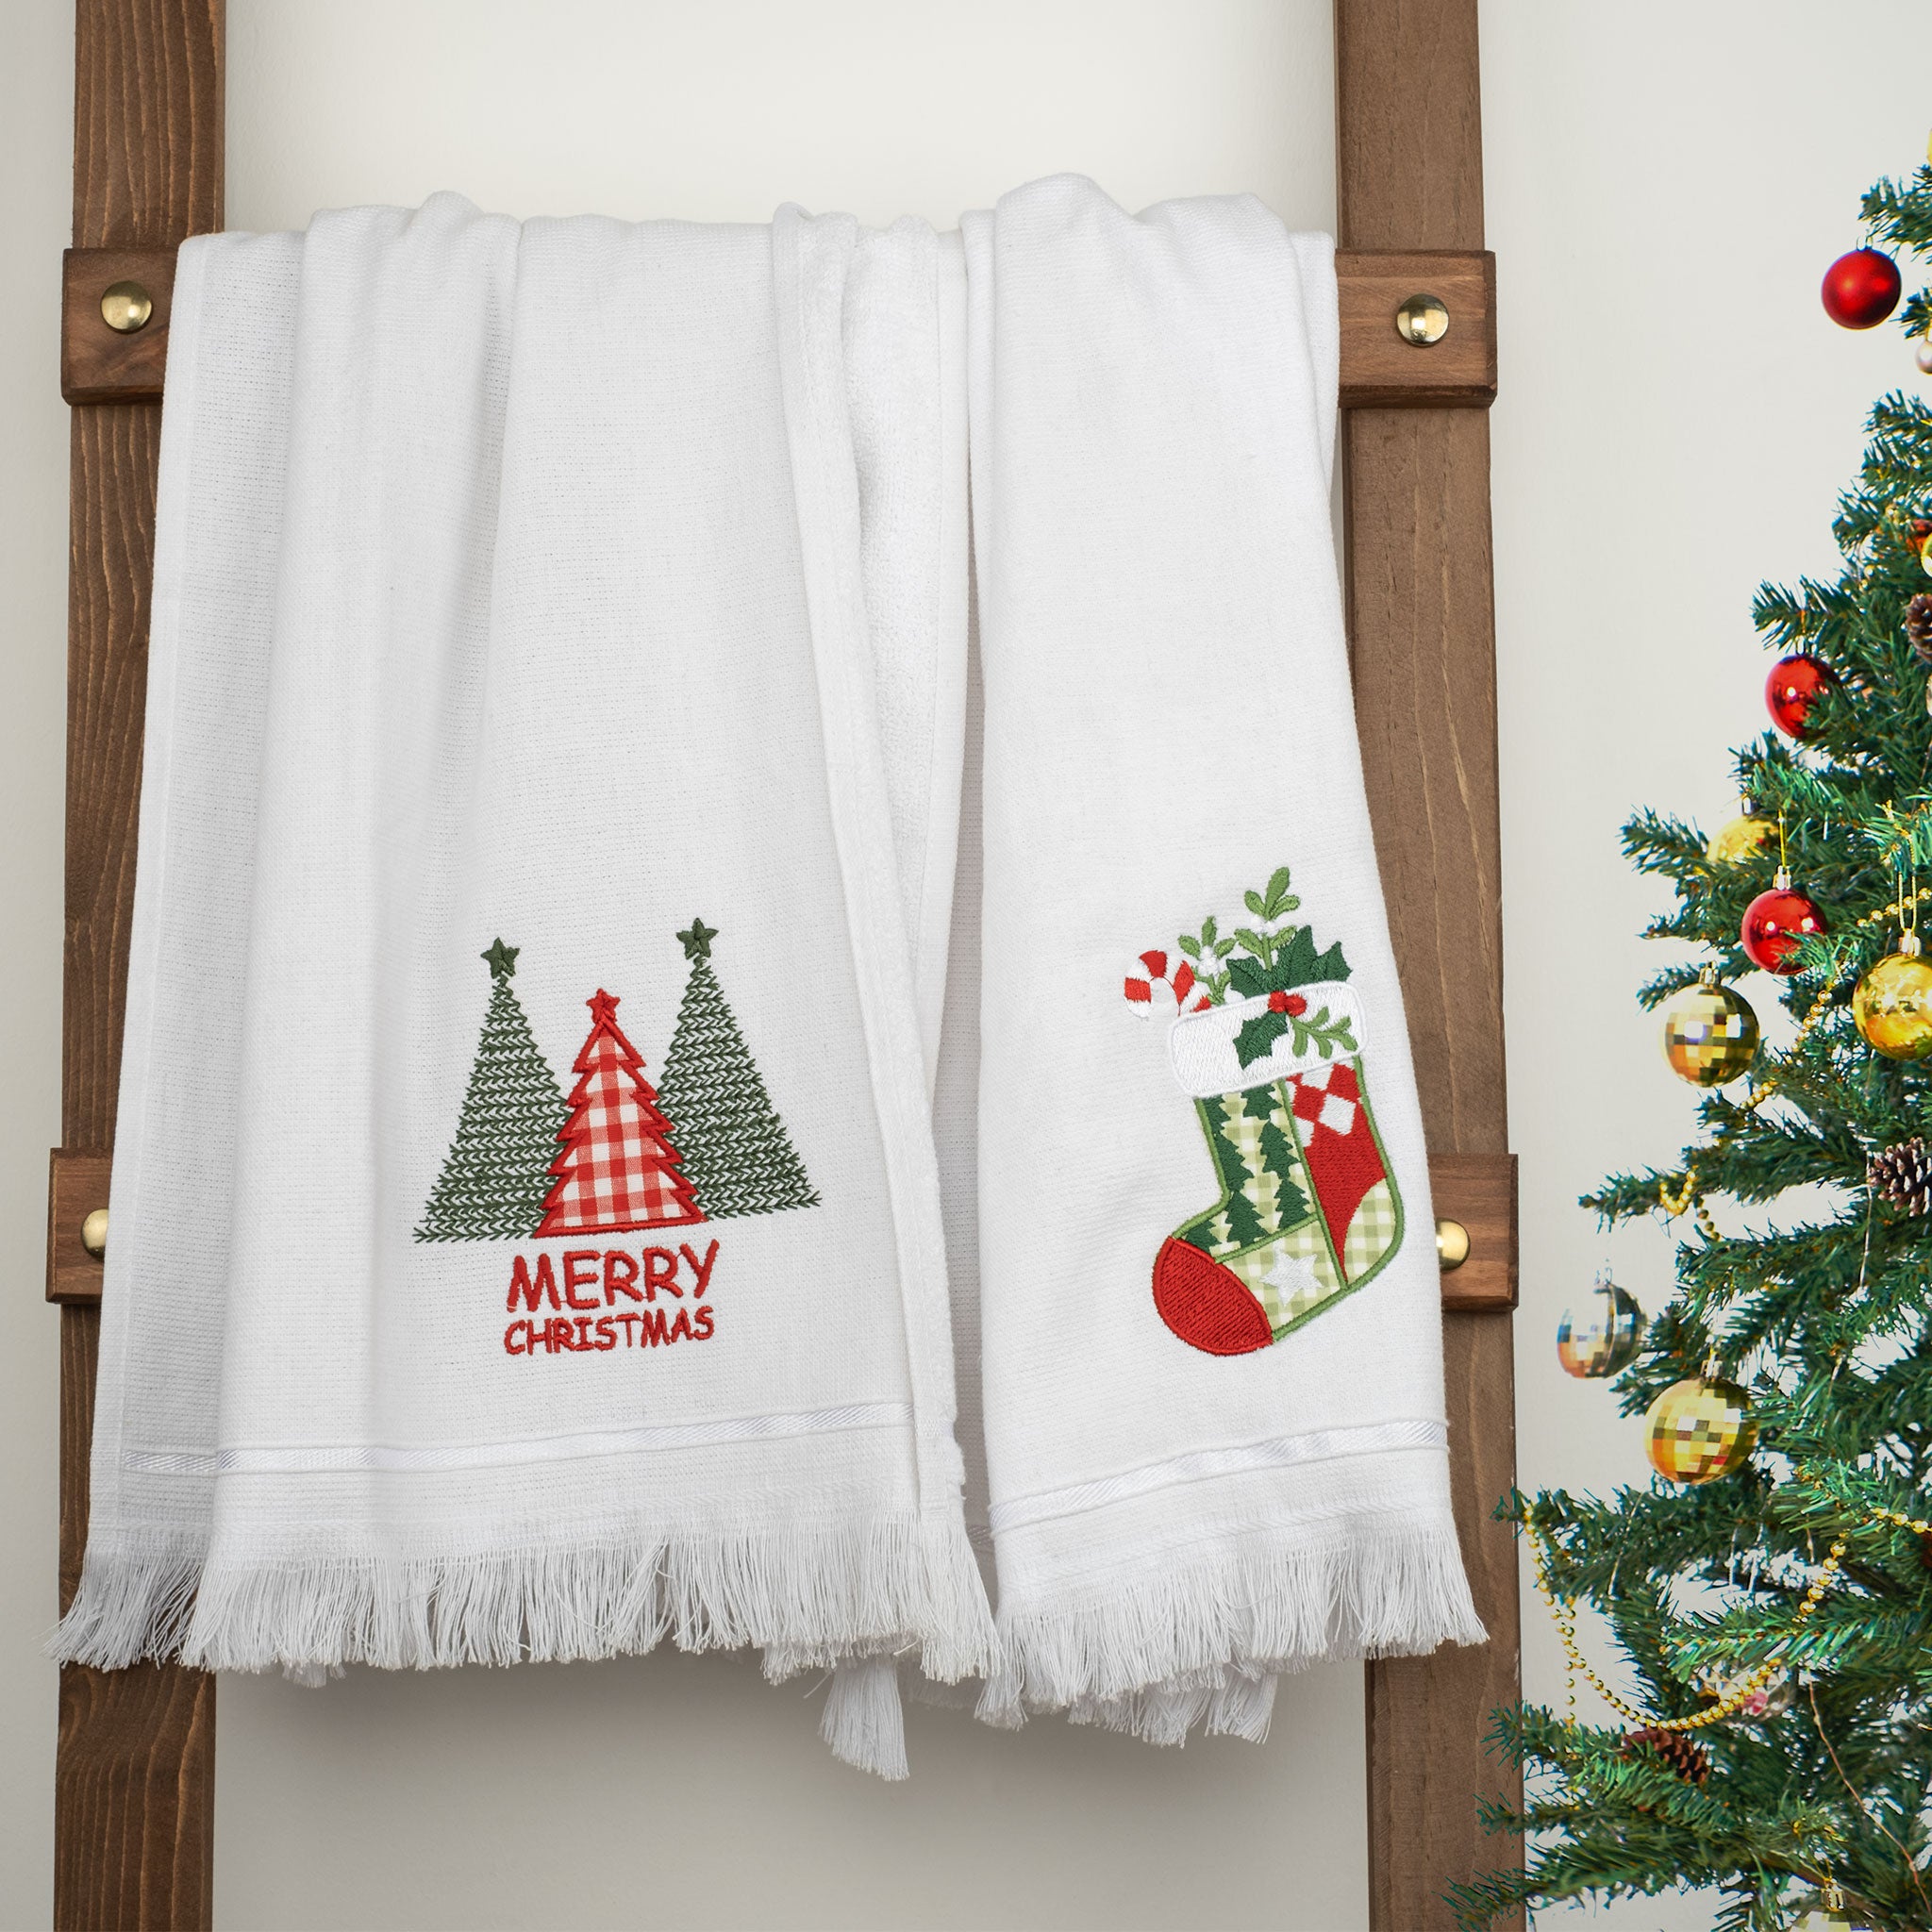  American Soft Linen - Christmas Towels Set 2 Packed Embroidered Turkish Cotton Hand Towels - Christmas Tree Socks - 4